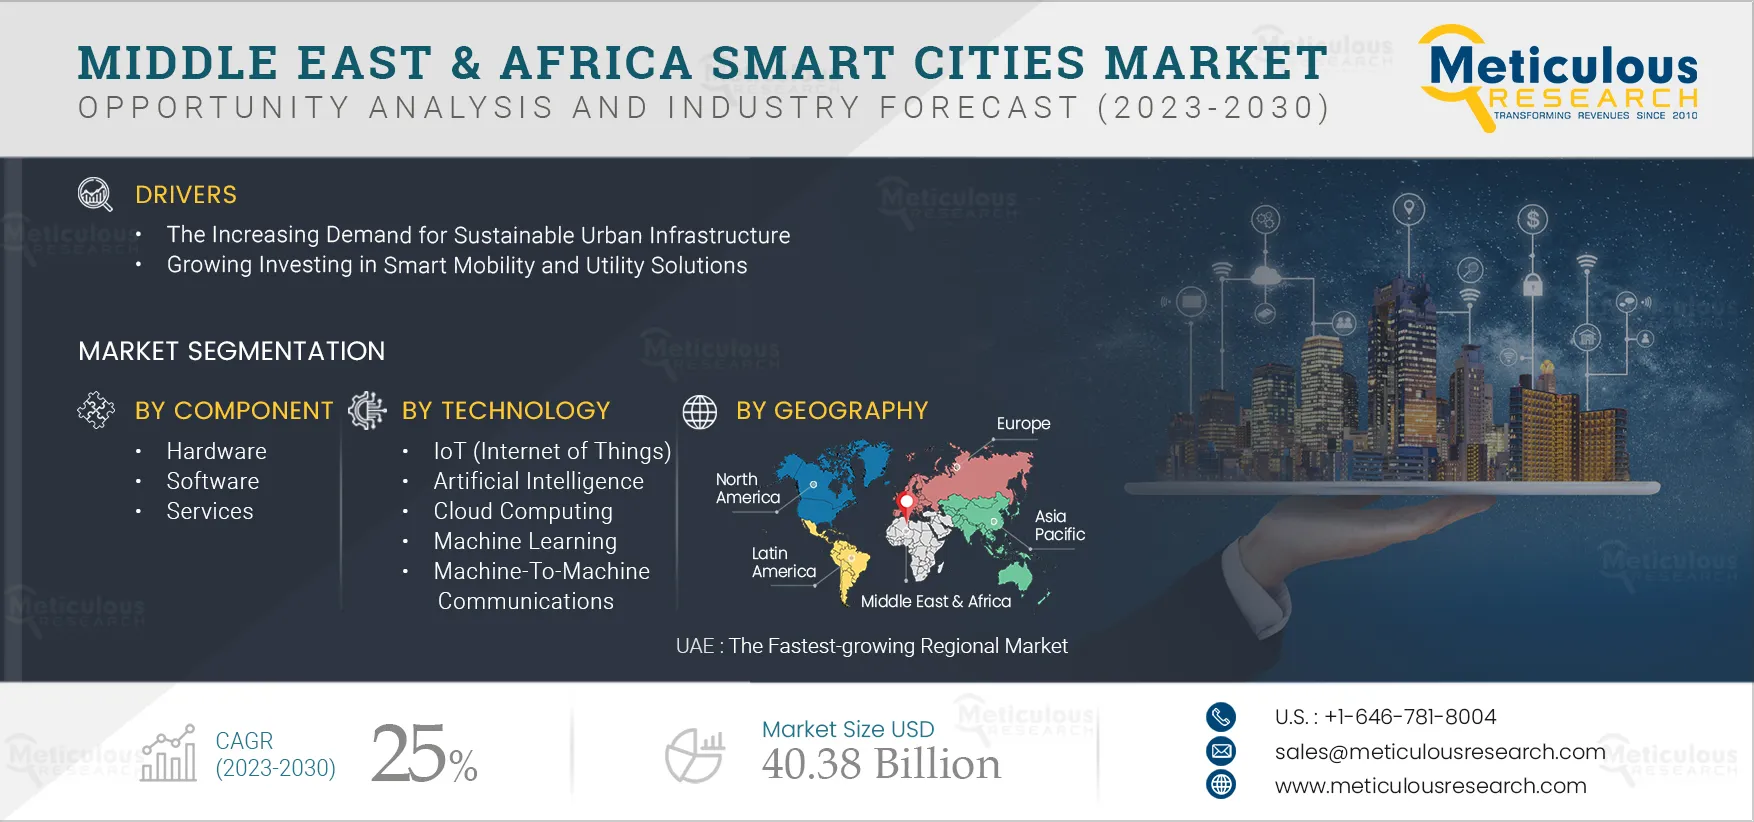 Middle East & Africa Smart Cities Market